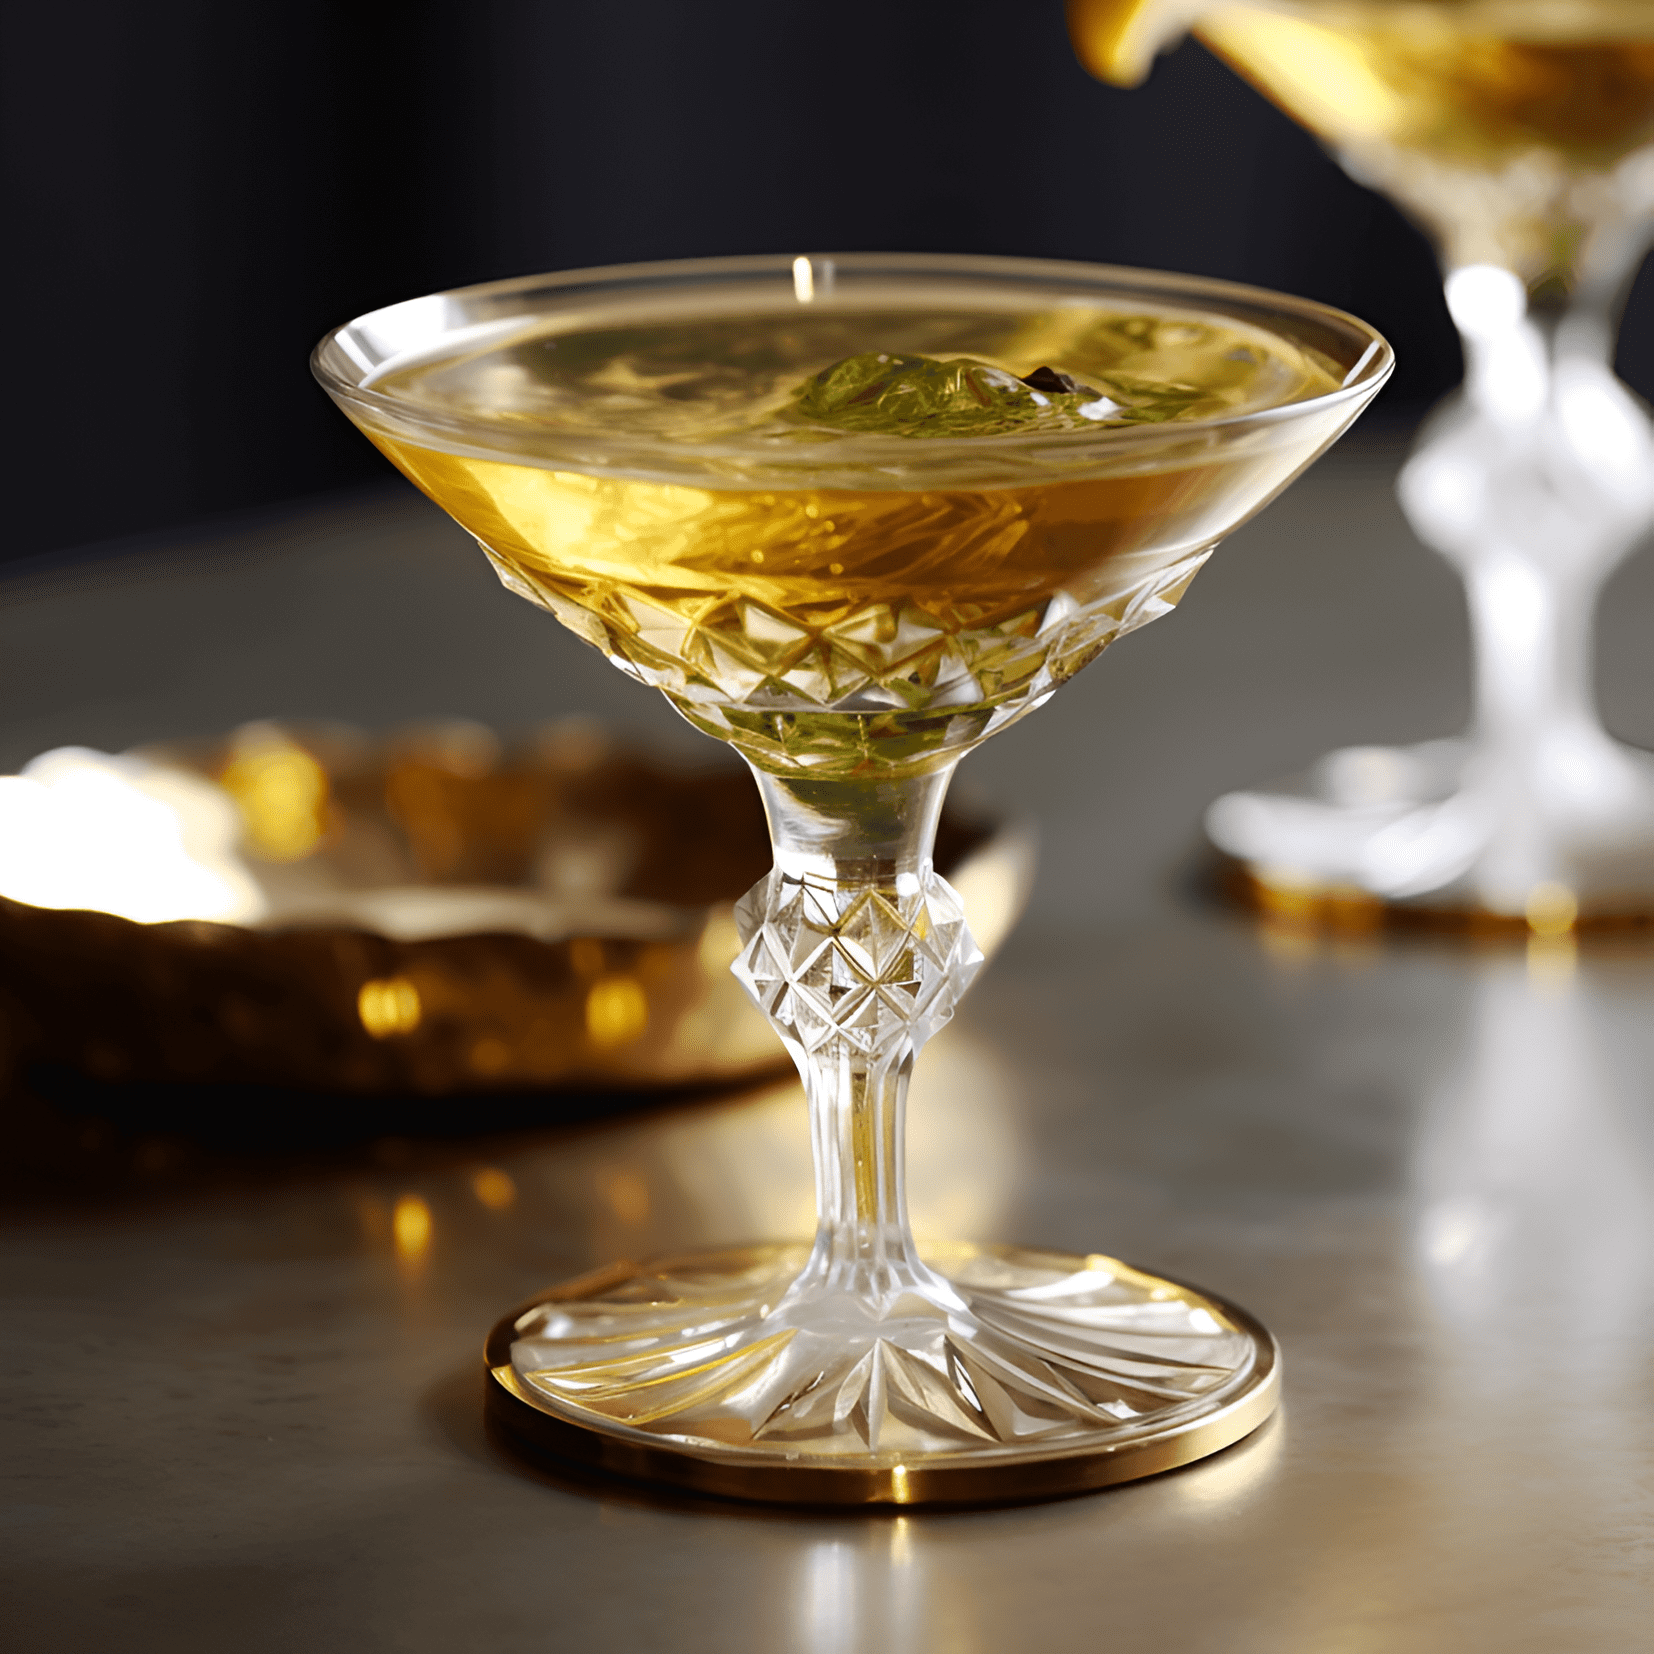 The Bijou cocktail has a complex and well-balanced taste, featuring herbal and botanical notes from the gin and green Chartreuse, sweetness from the sweet vermouth, and a hint of bitterness from the orange bitters. It is a strong, rich, and slightly sweet drink with a smooth and velvety texture.